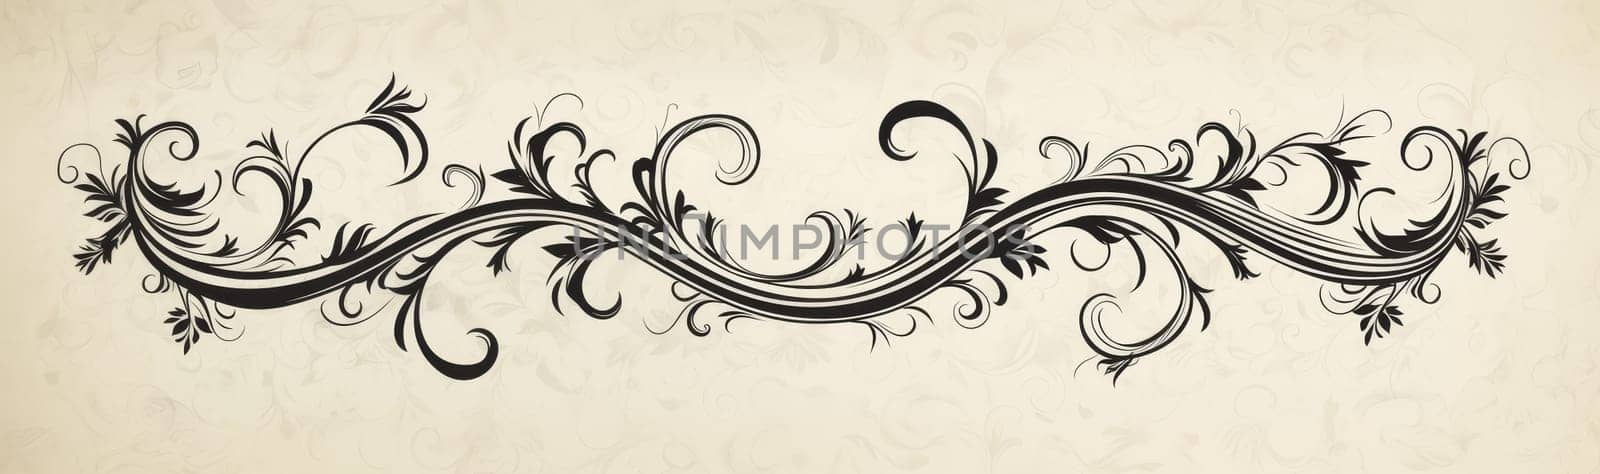 Wide, panoramic vintage ornamental design with intricate floral patterns on a cream background